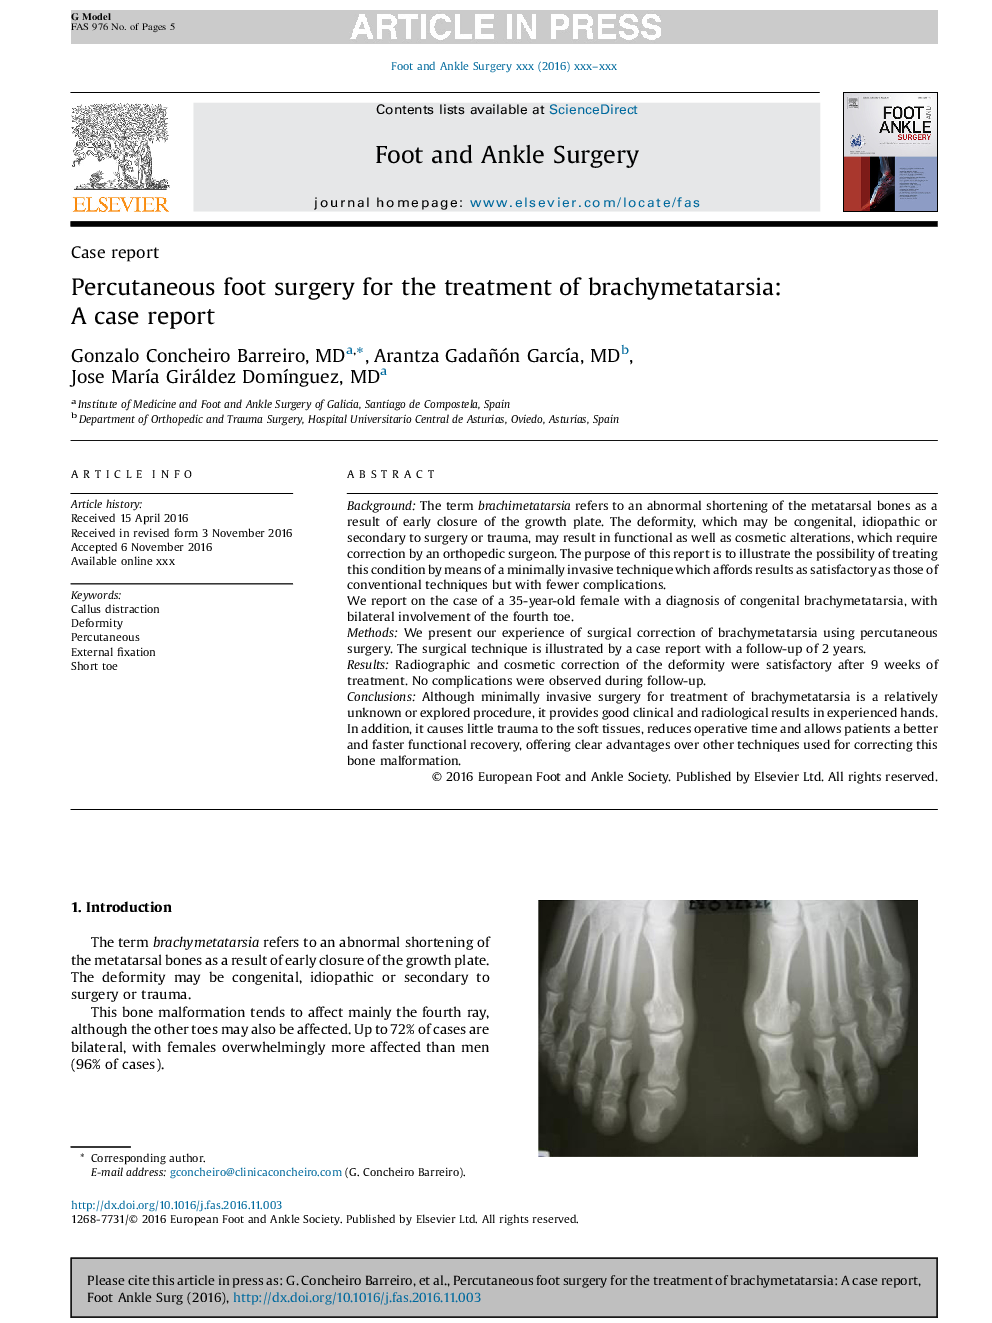 Percutaneous foot surgery for the treatment of brachymetatarsia: A case report